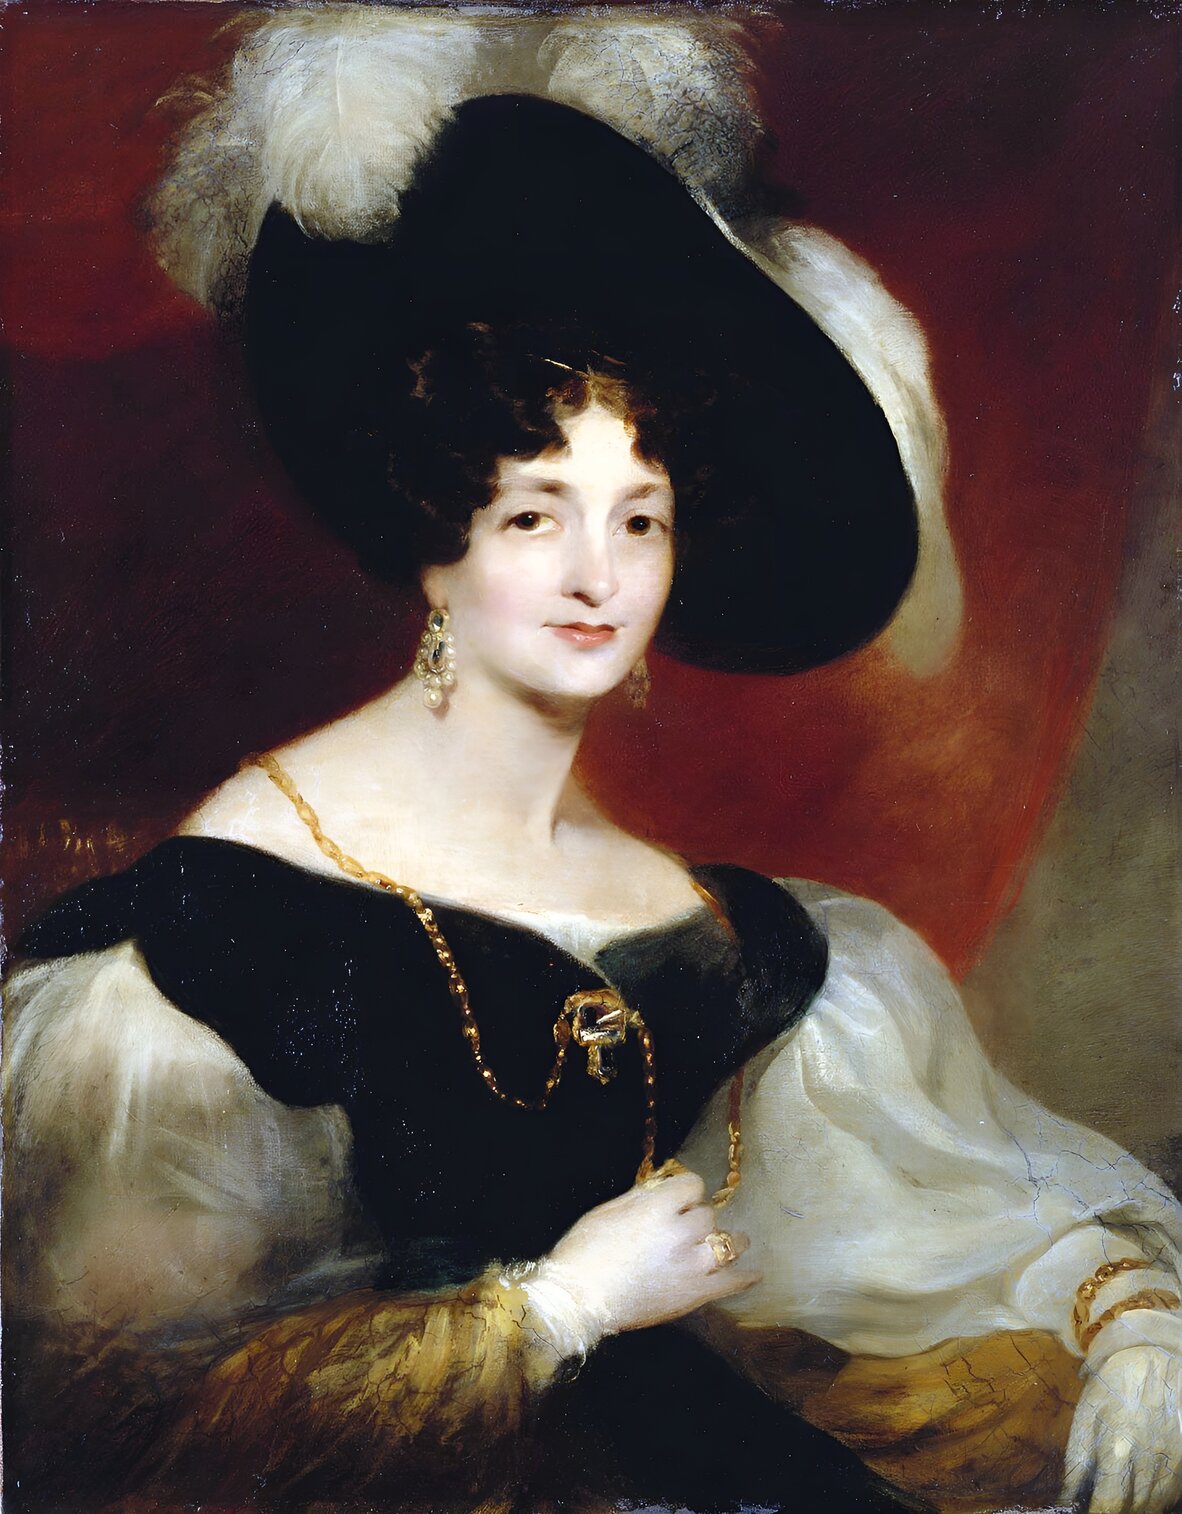 Portrait of Victoria, Duchess of Kent by Richard Rothwell, 1832